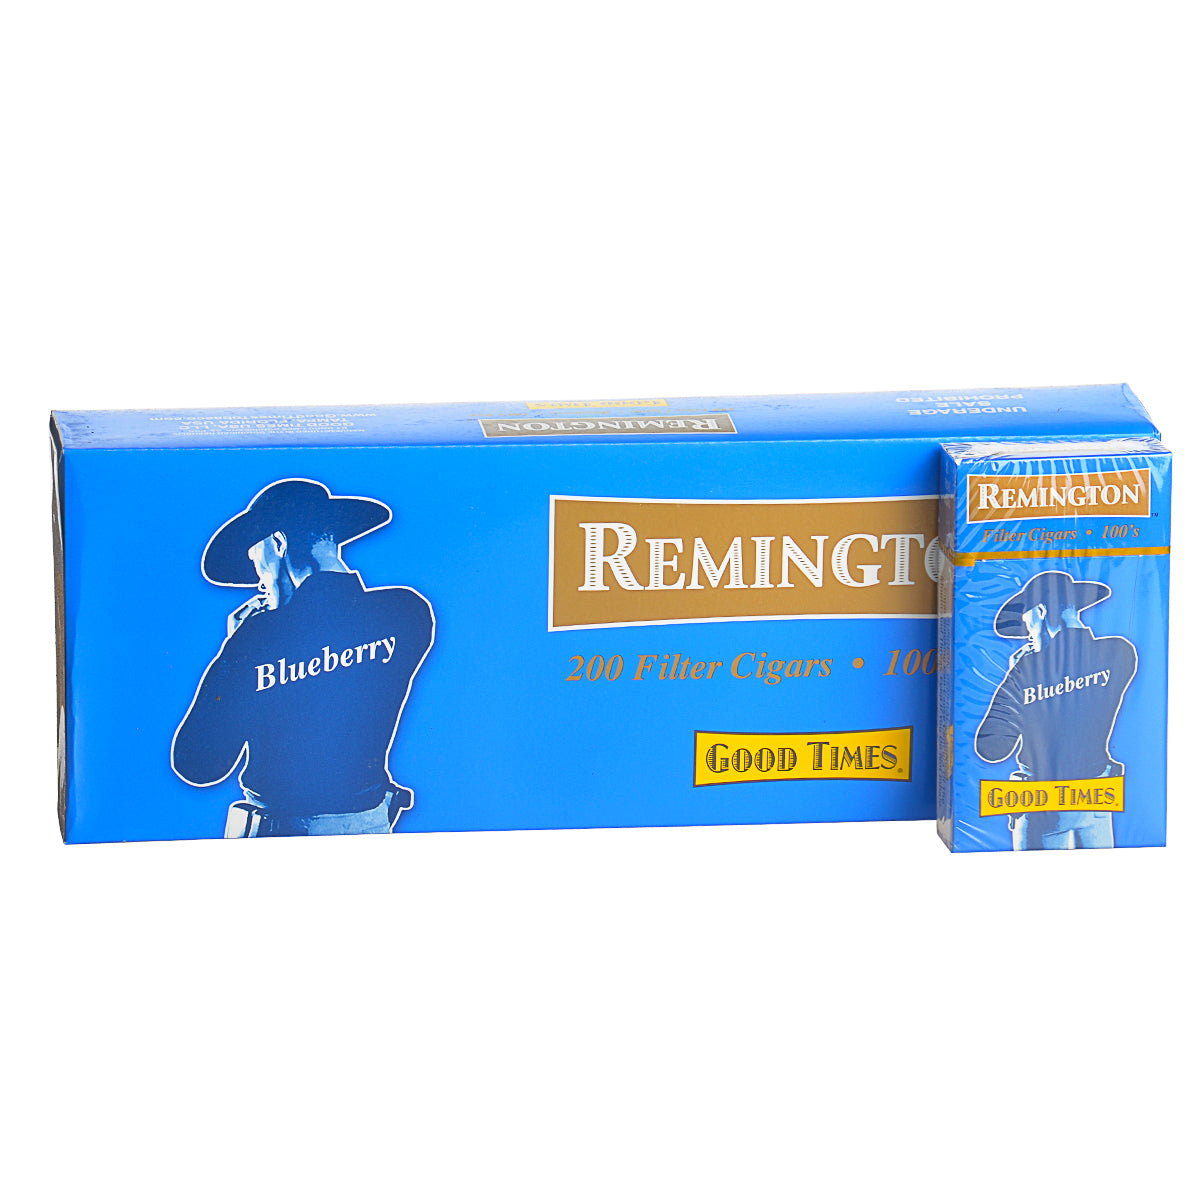 Remington Blueberry Filtered Cigars 10 Packs of 20 1